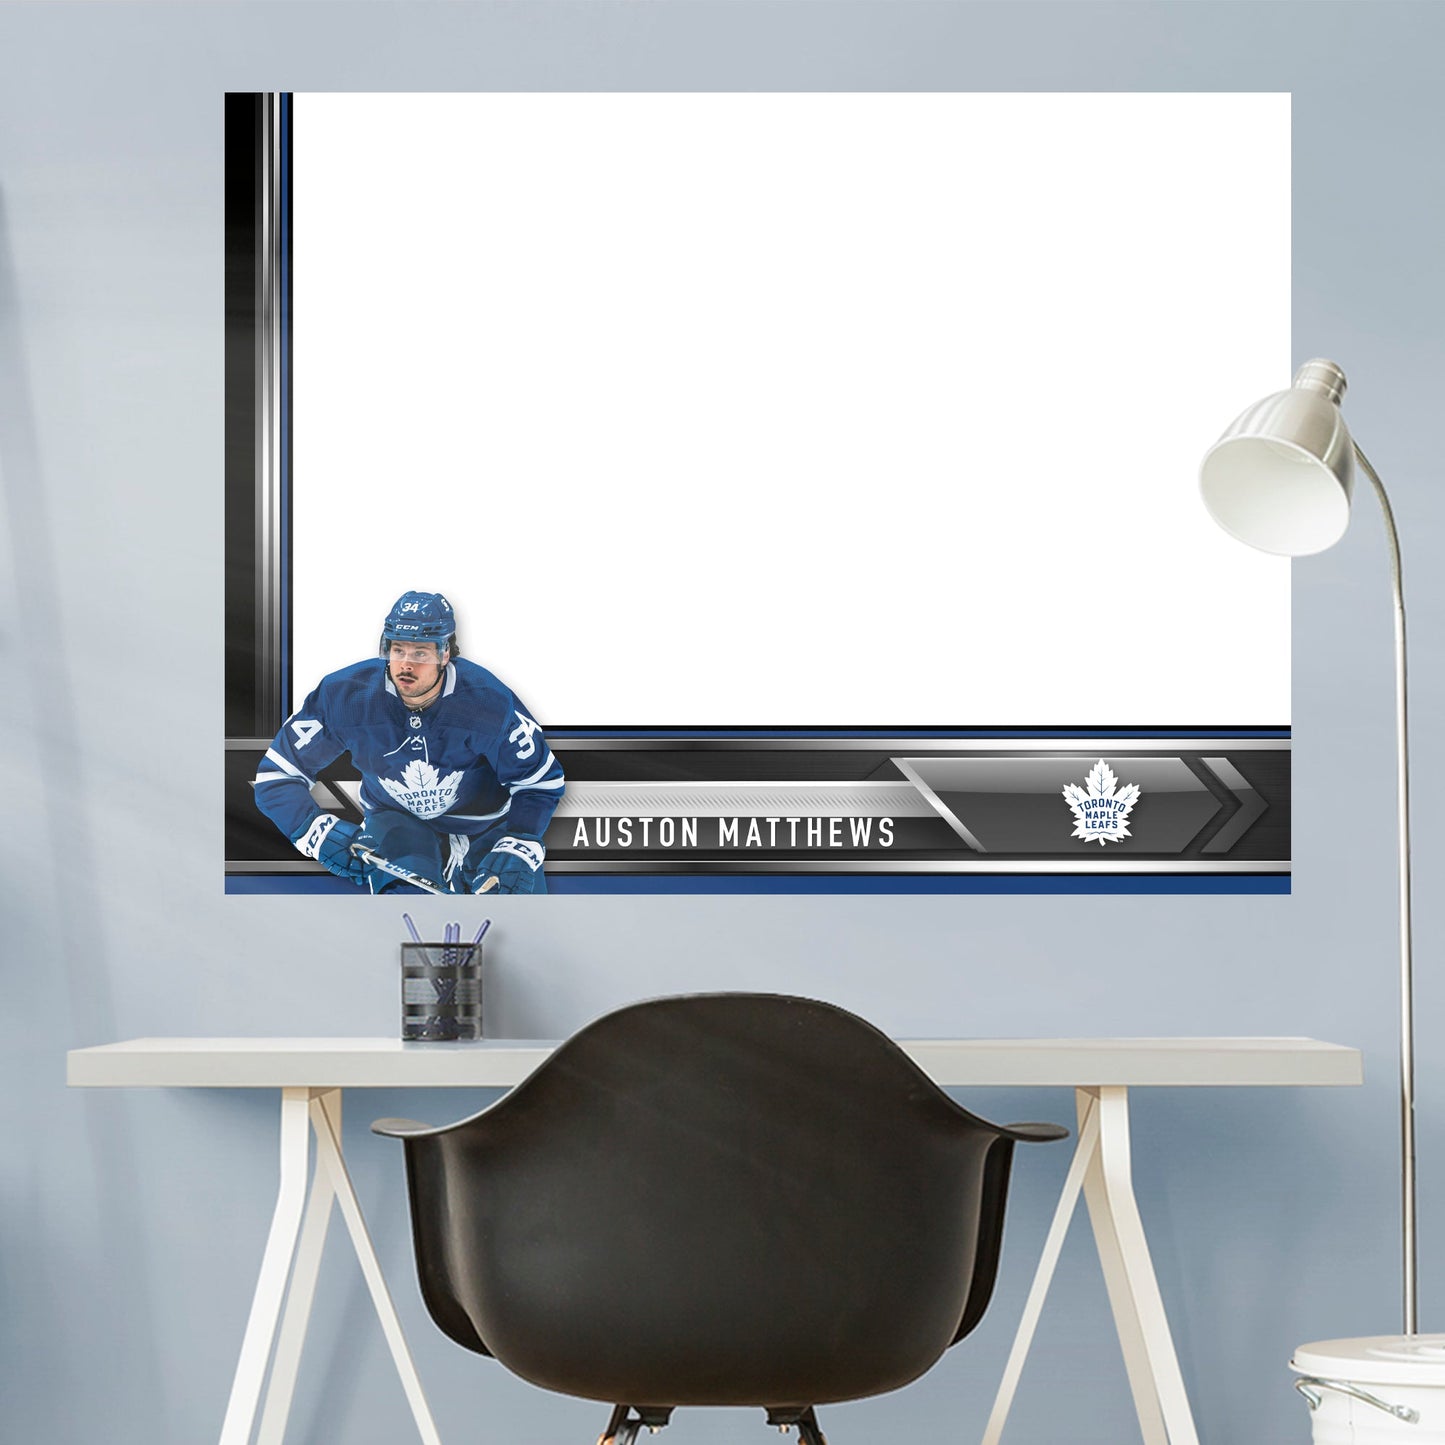 Toronto Maple Leafs: Auston Matthews Dry Erase Whiteboard - Officially Licensed NHL Removable Adhesive Decal